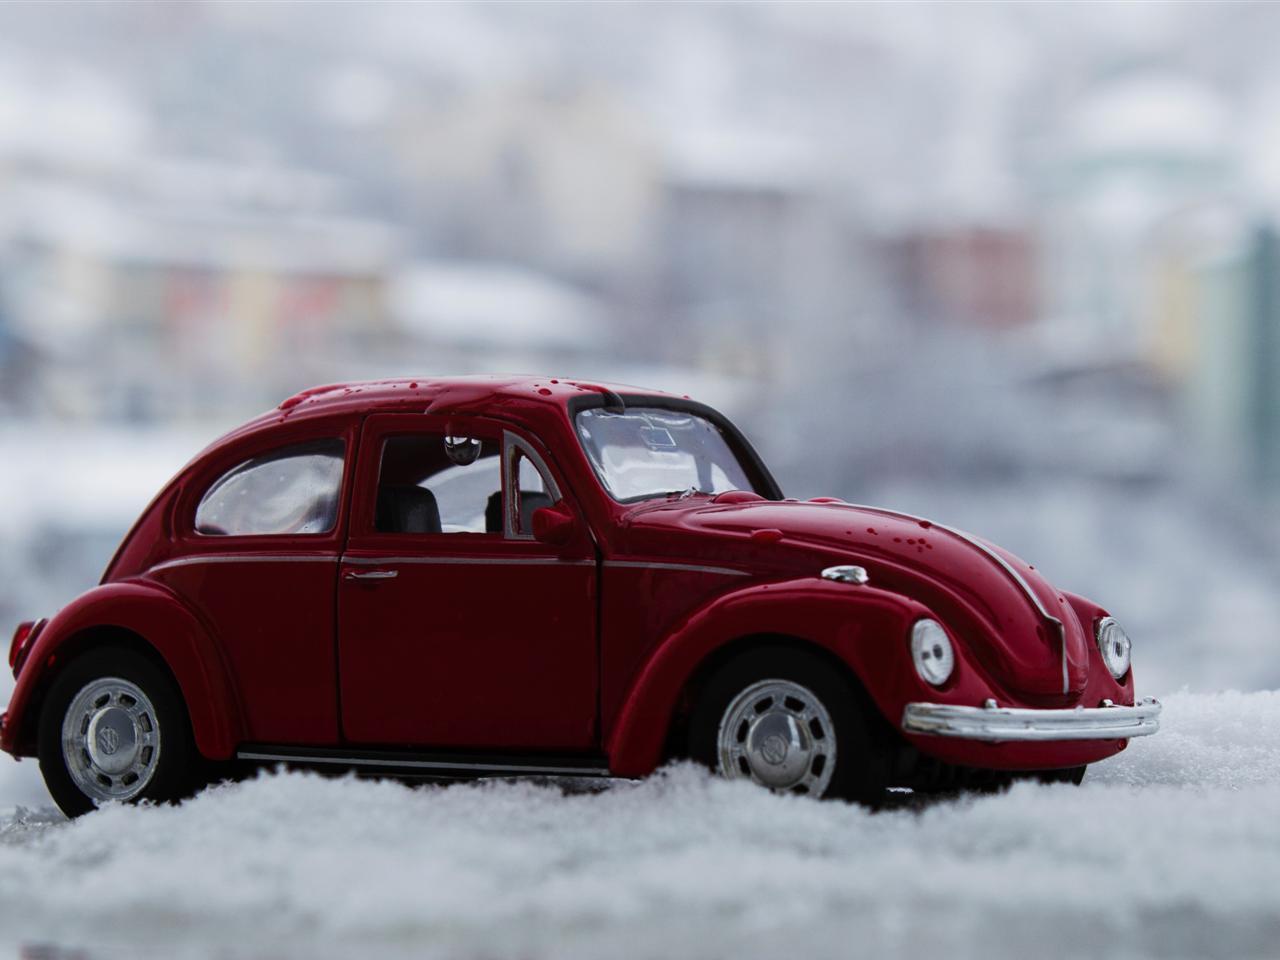 Wallpapers Hd Autos Clasicos Y Deportivos - Winter Snow Toy Car , HD Wallpaper & Backgrounds